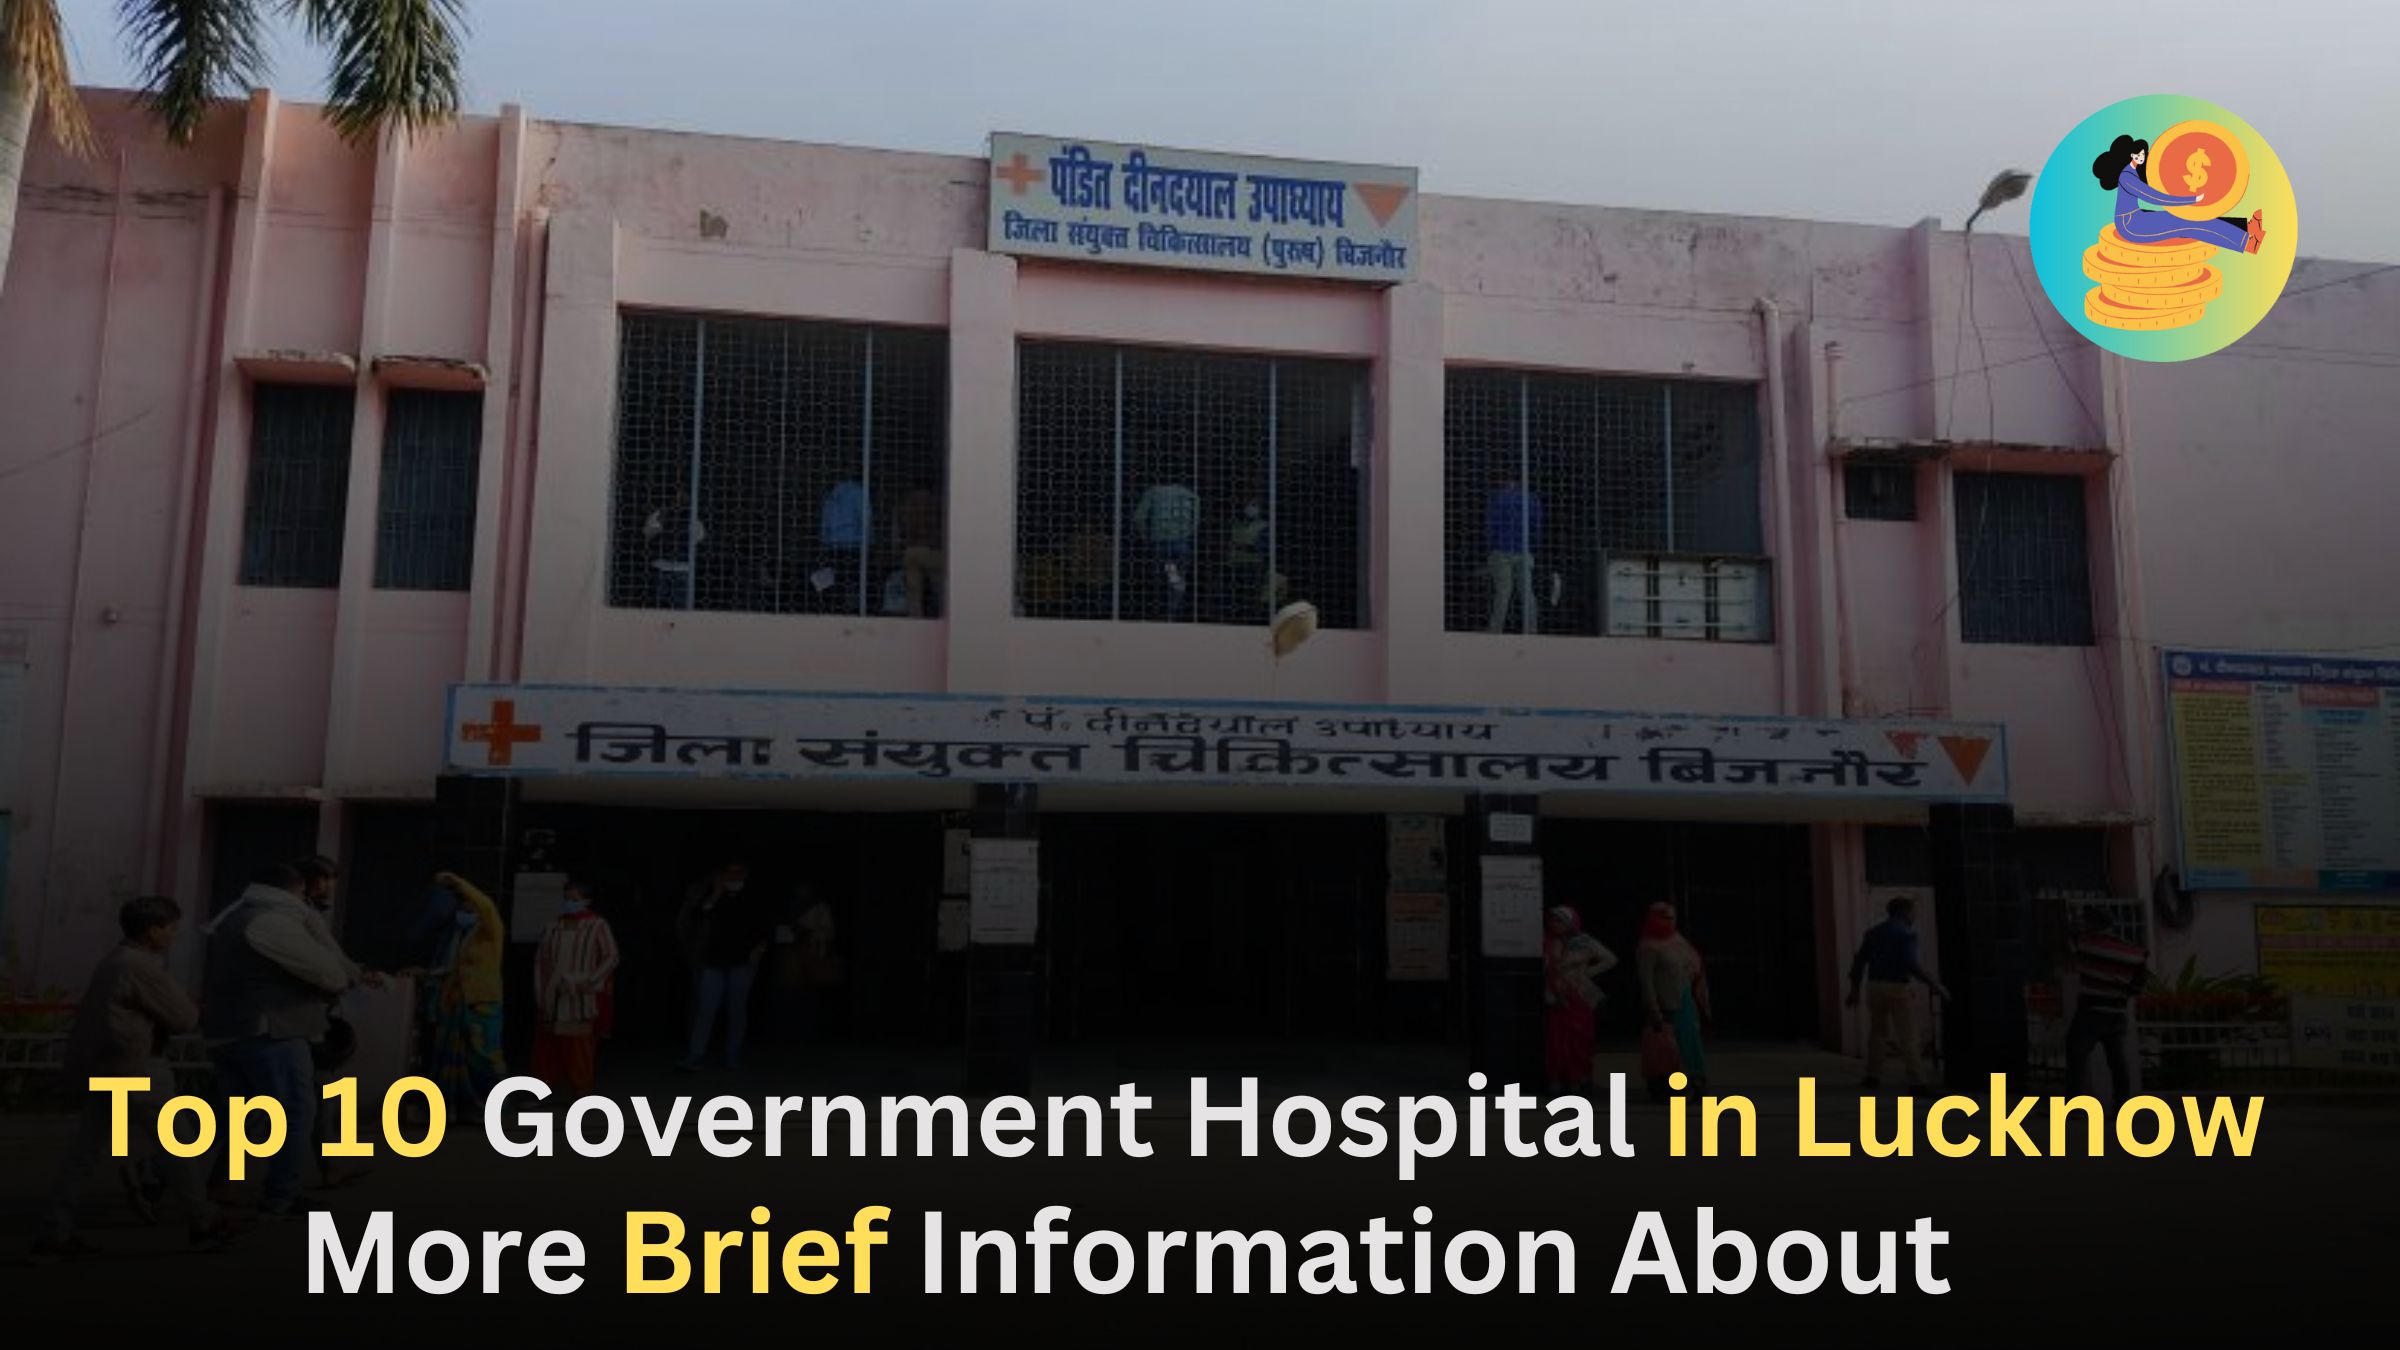 Top 10 Government Hospital in Lucknow, More Brief Information